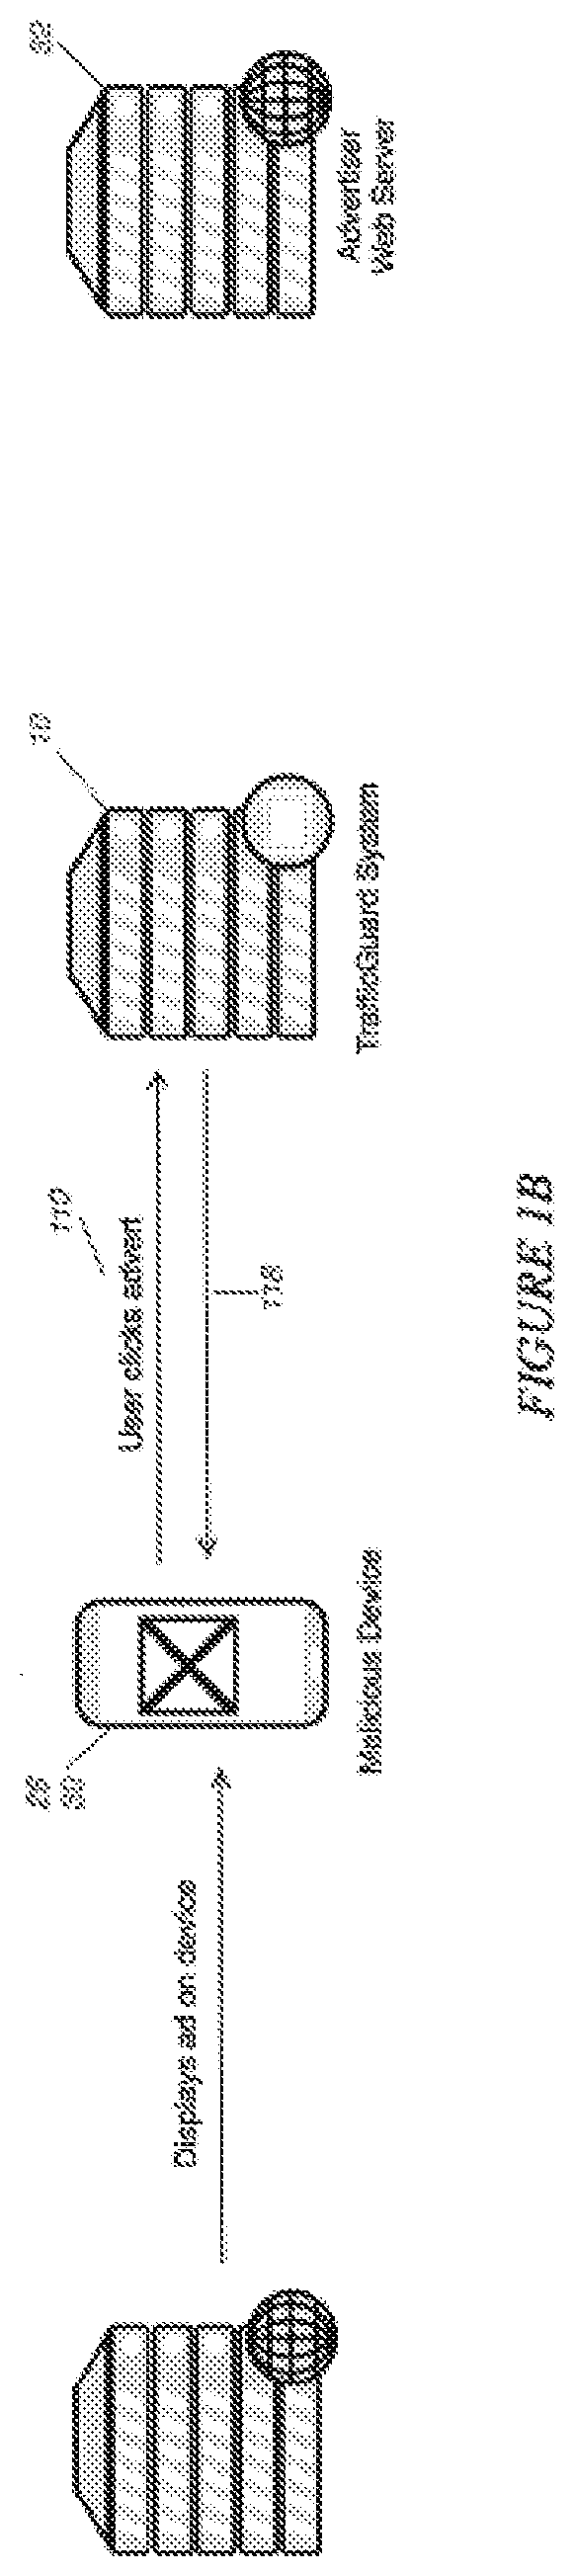 System and Methods for Mitigating Fraud in Real Time Using Feedback